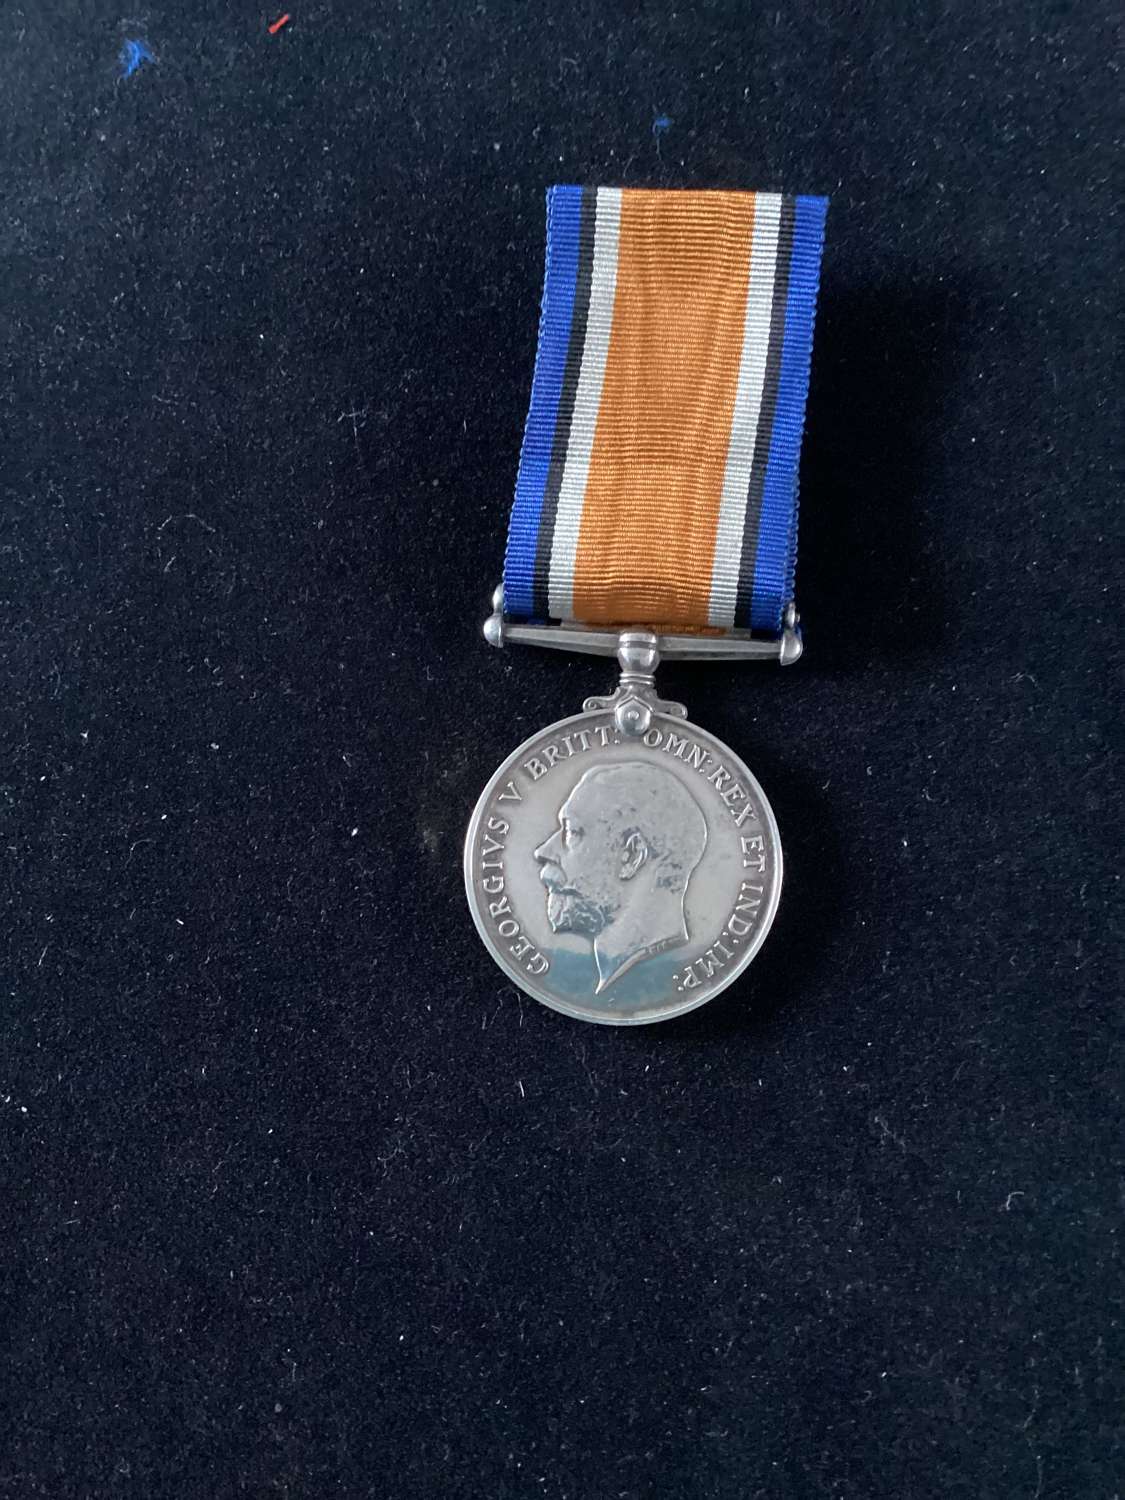 BWM (F.20227 H C R Le Mare AC1 RNAS) his only medal.